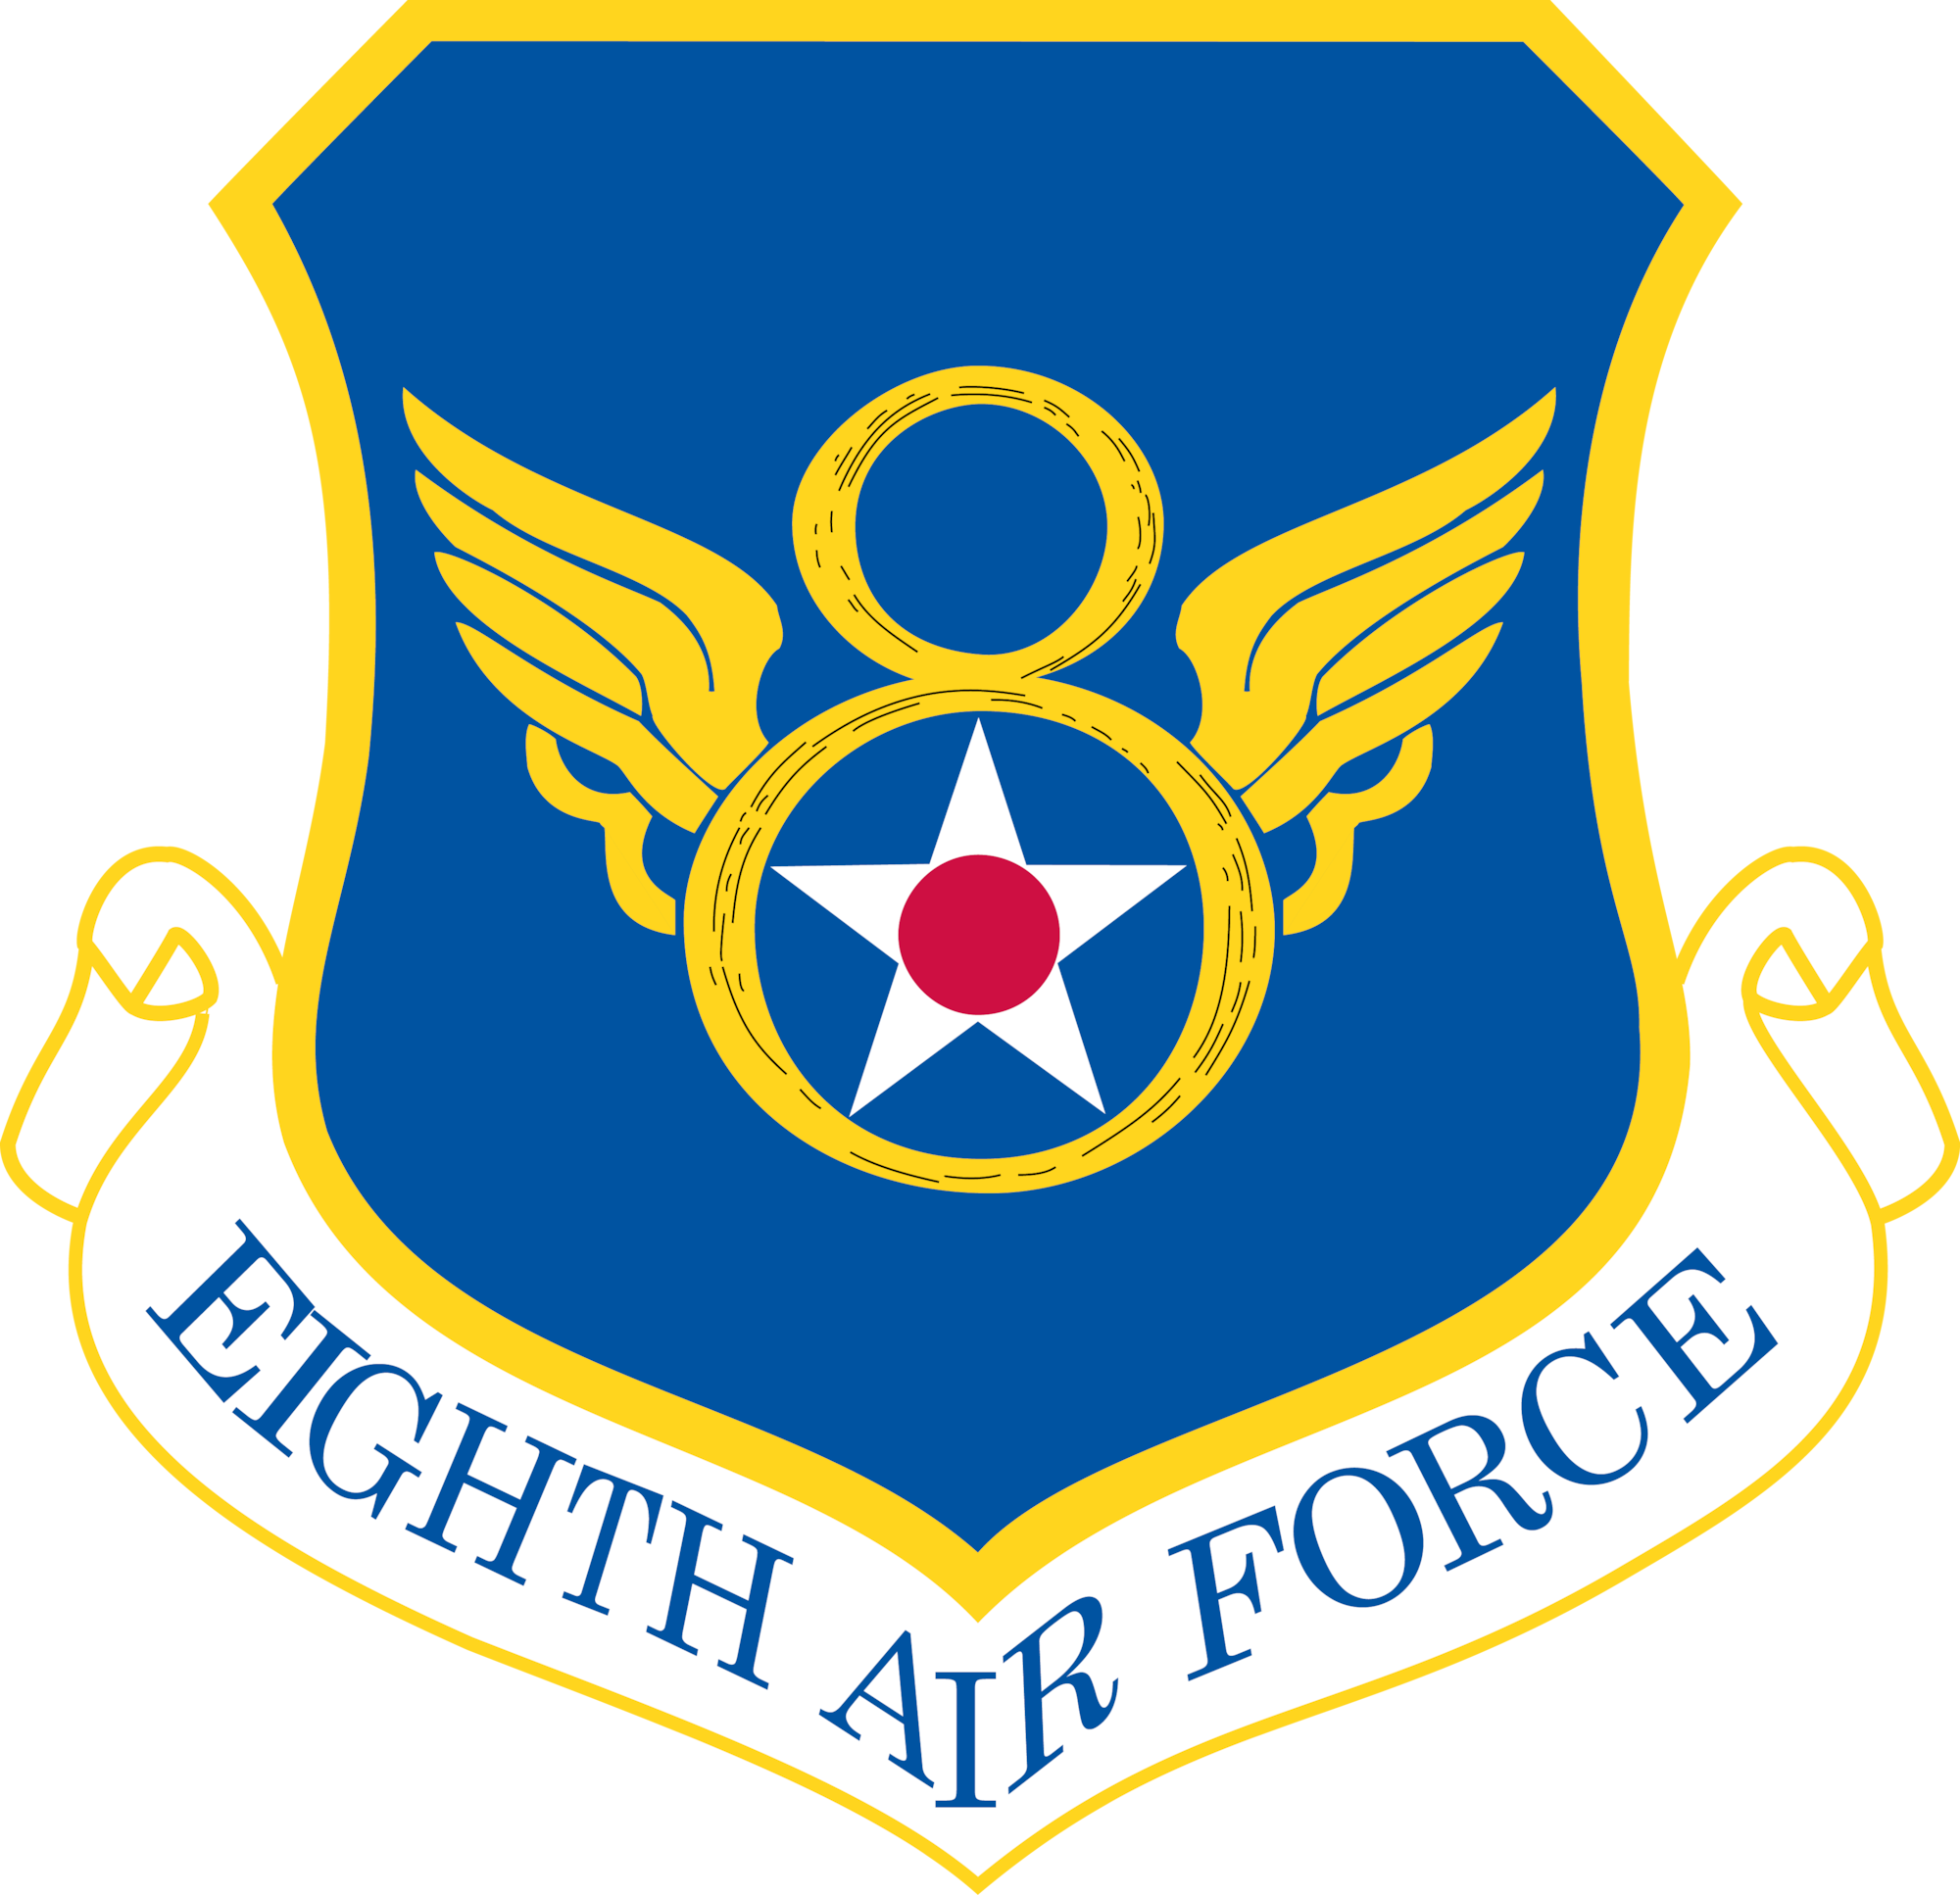 A blue shield with yellow eight with star in the bottom circle of the eight. Eighth Air Force text along the bottom.